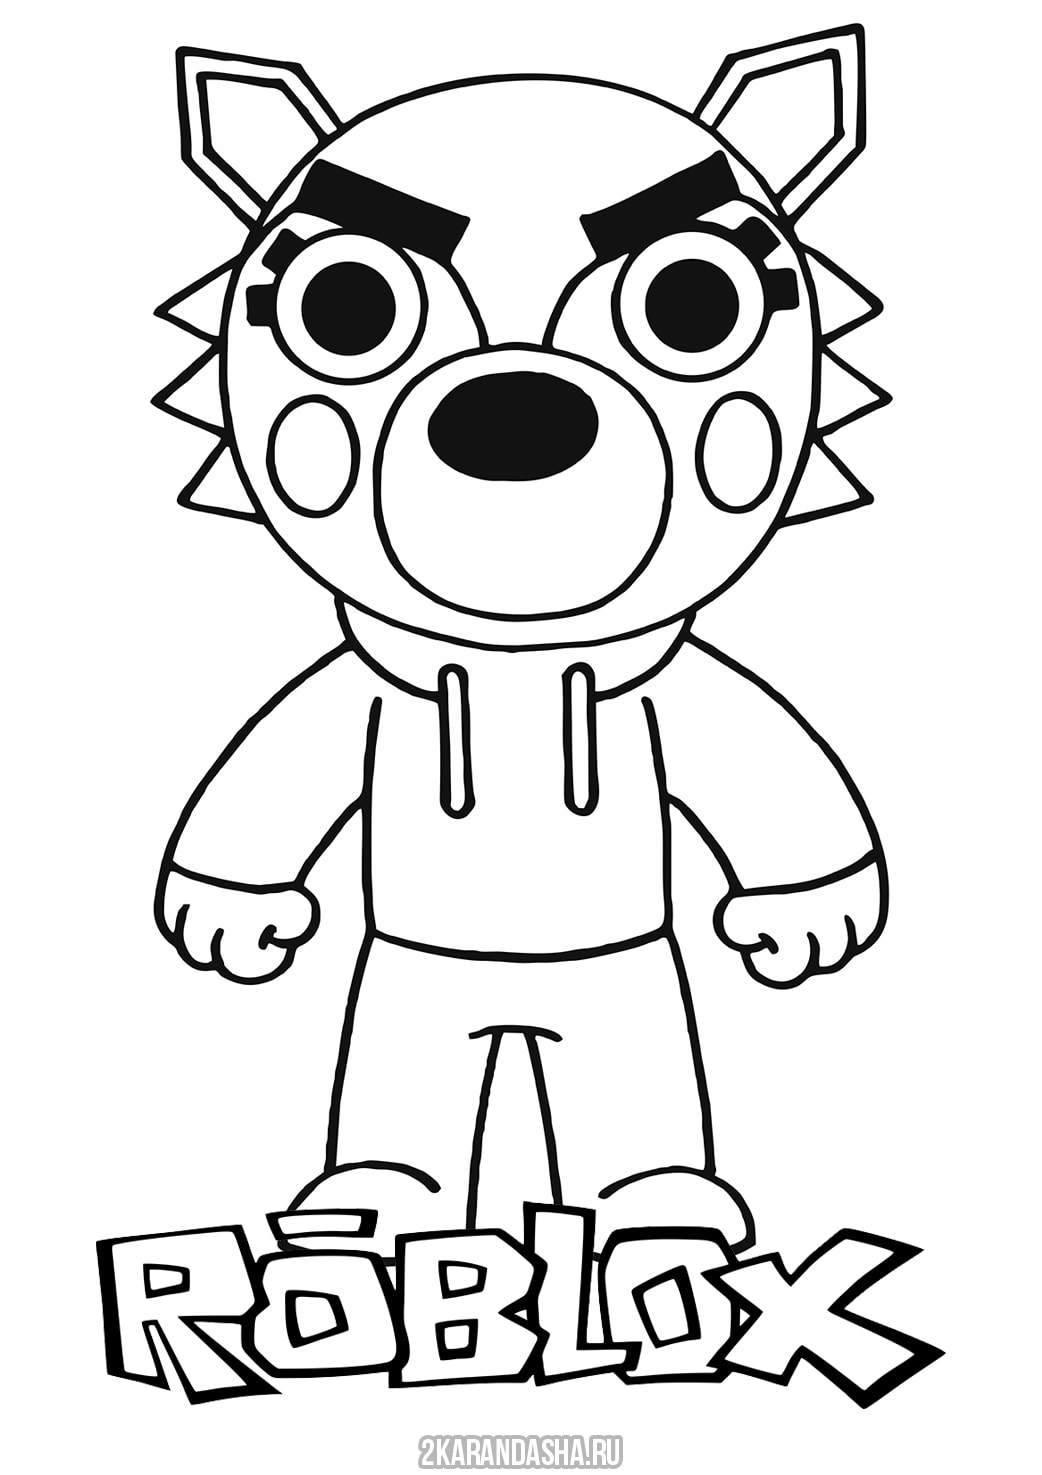 Coloring Page Roblox Piggi Willow Wolf Print Roblox - roblox piggy coloring pages printable